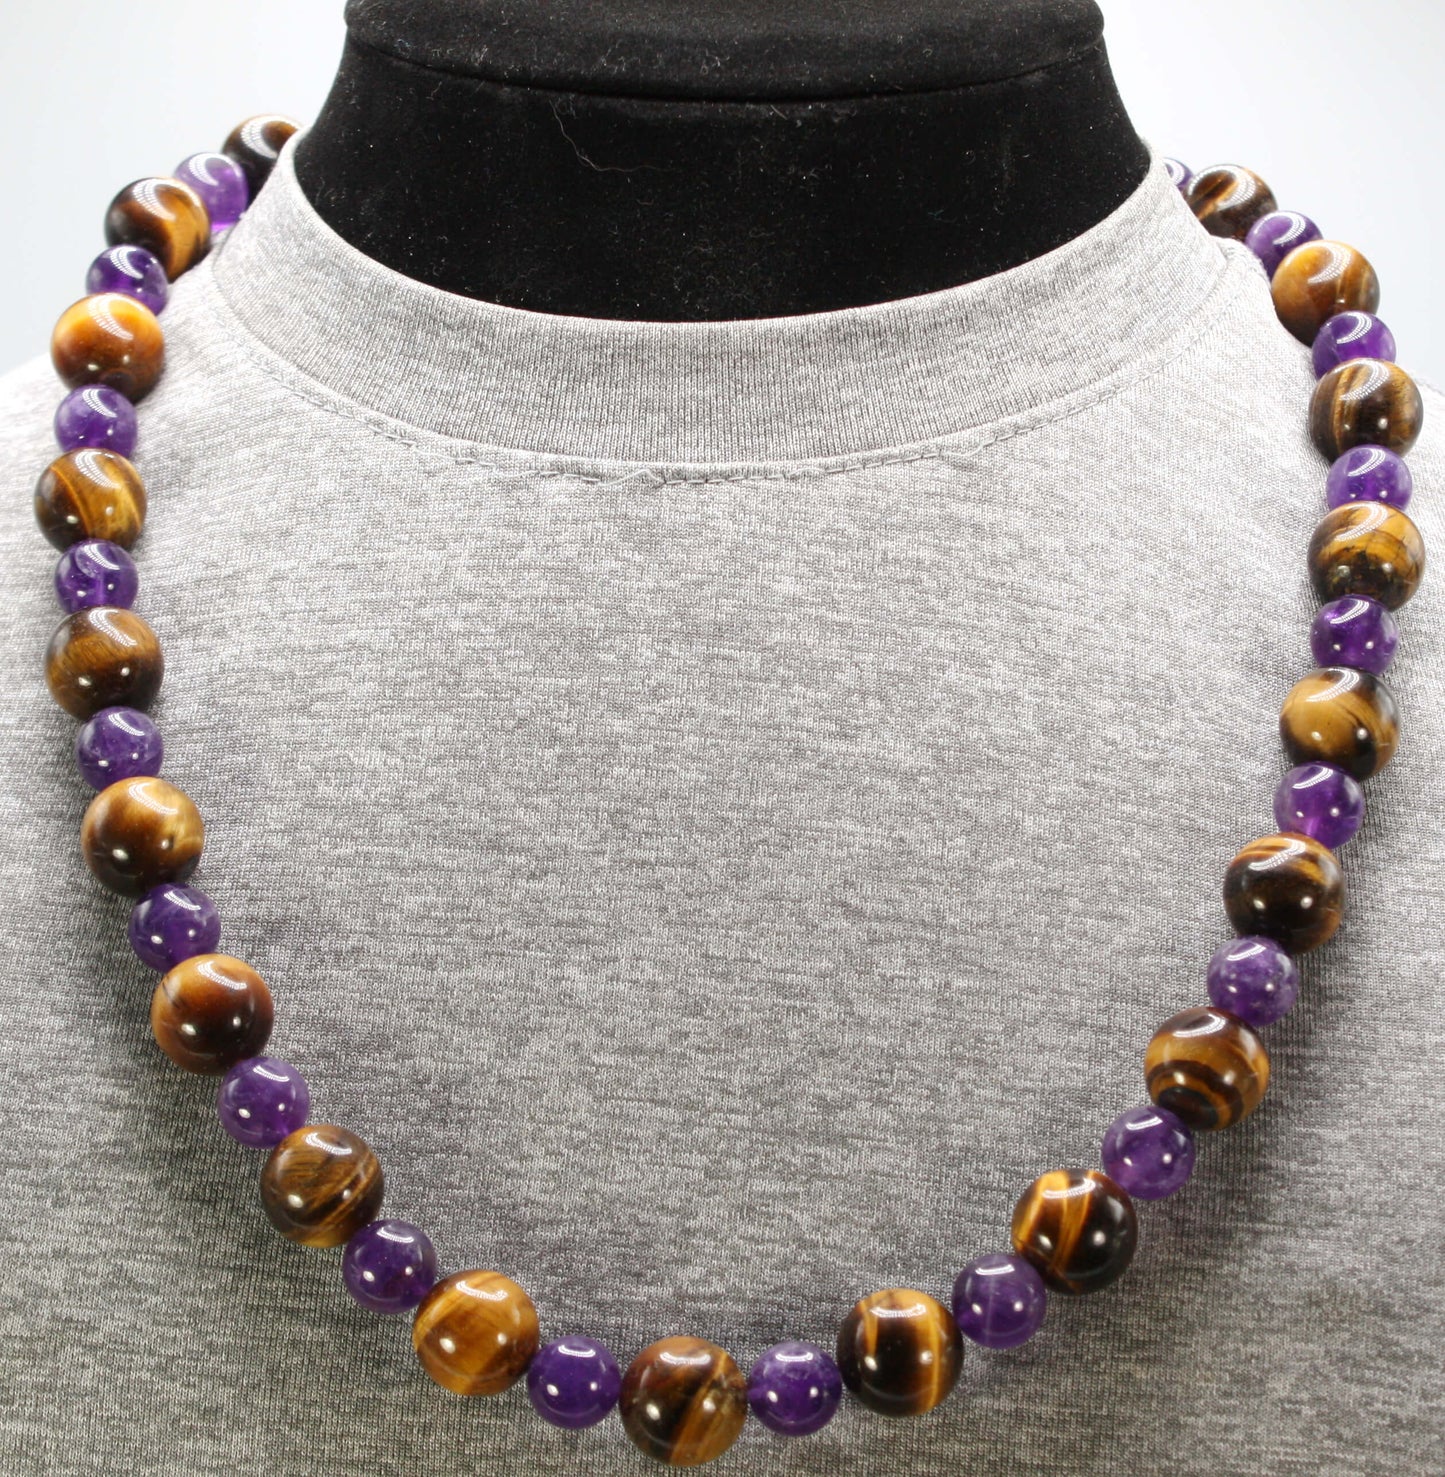 Genuine Tiger Eye and Amethyst Necklace - Gifts for Men/Women - 14mm and 10mm Beaded Necklace